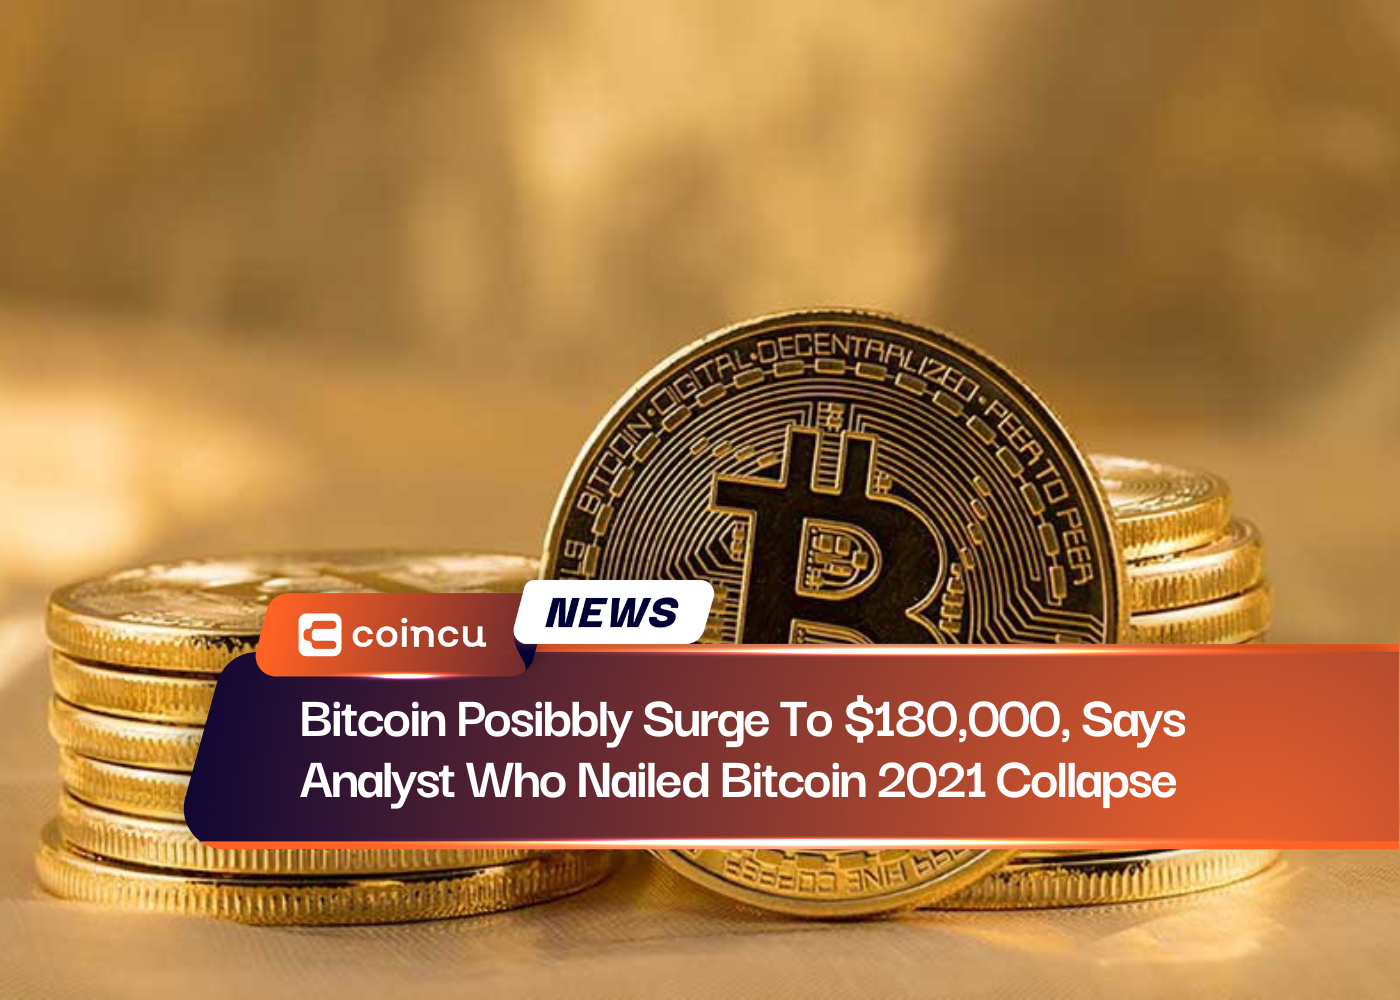 Bitcoin Posibbly Surge To $180,000, Says Analyst Who Nailed Bitcoin 2021 Collapse